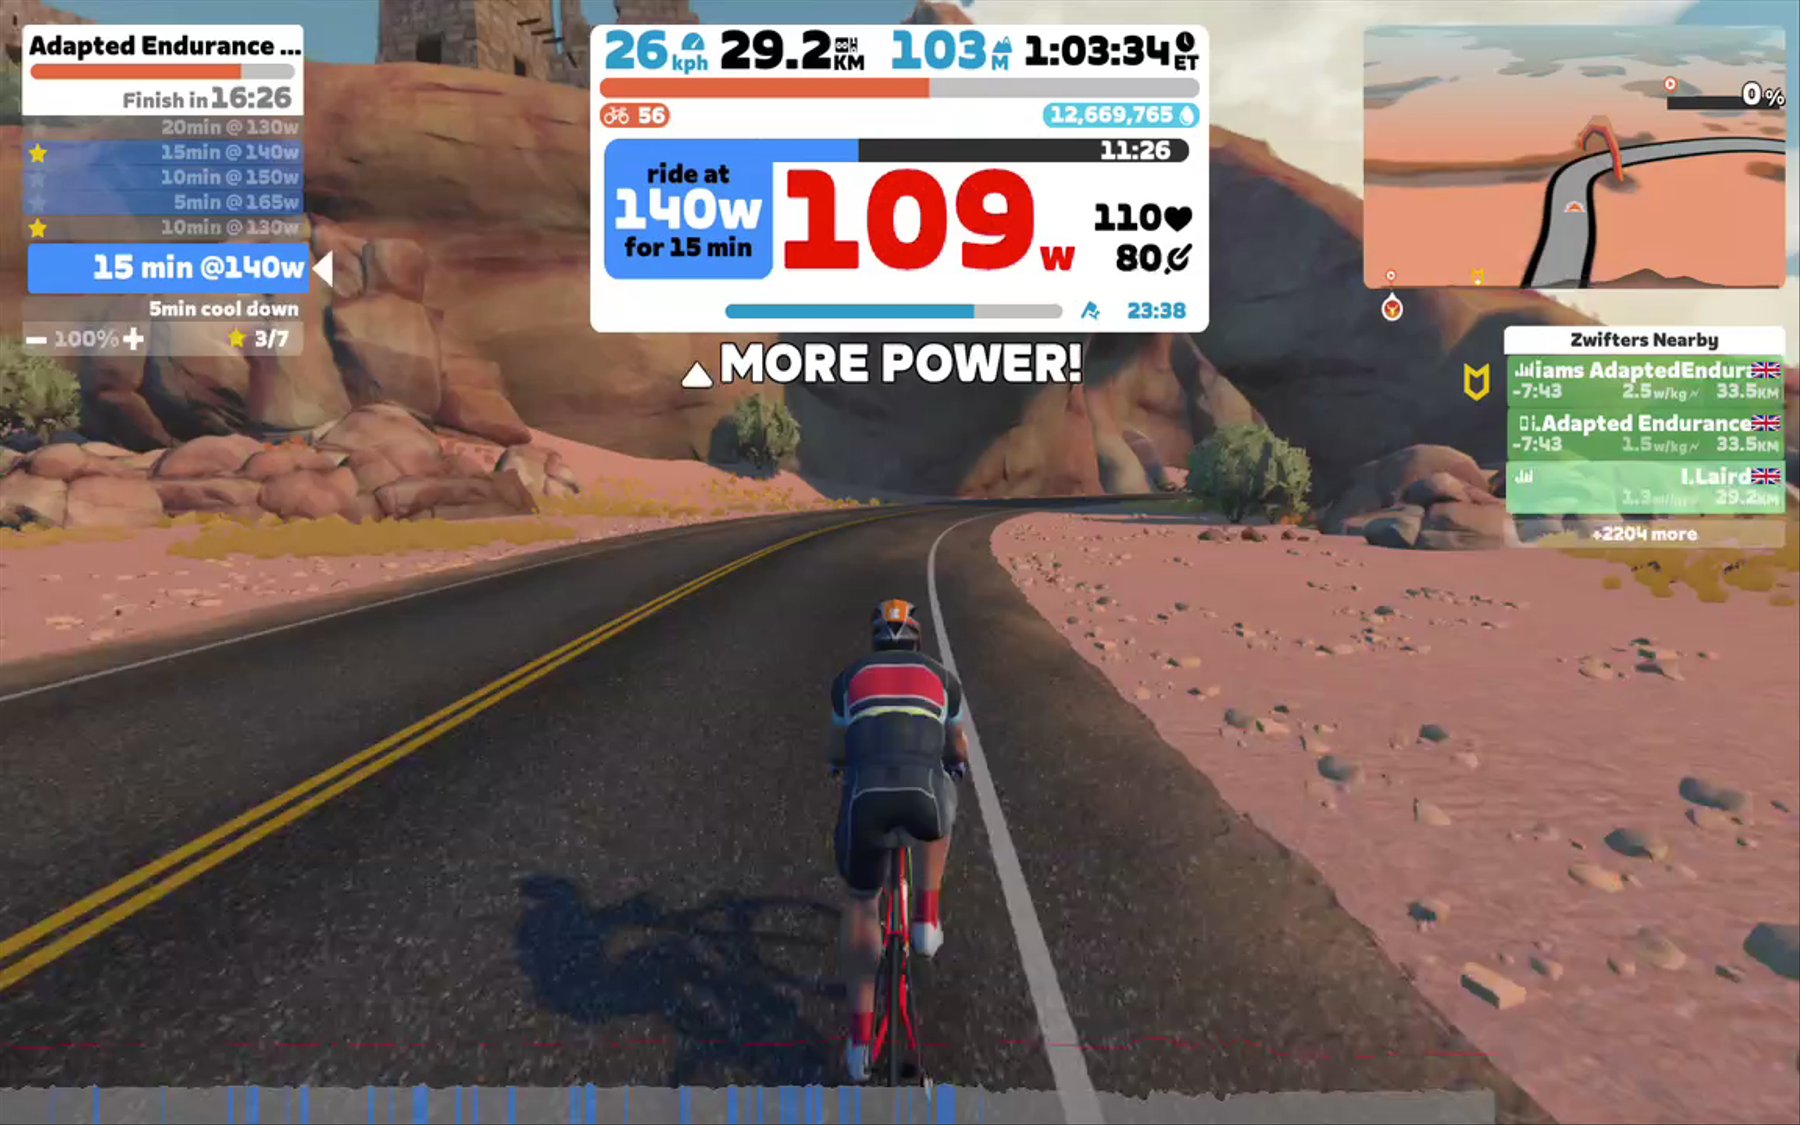 Zwift - Claire 'Willy' Williams AdaptedEndura's Meetup on Big Flat 8 in Watopia